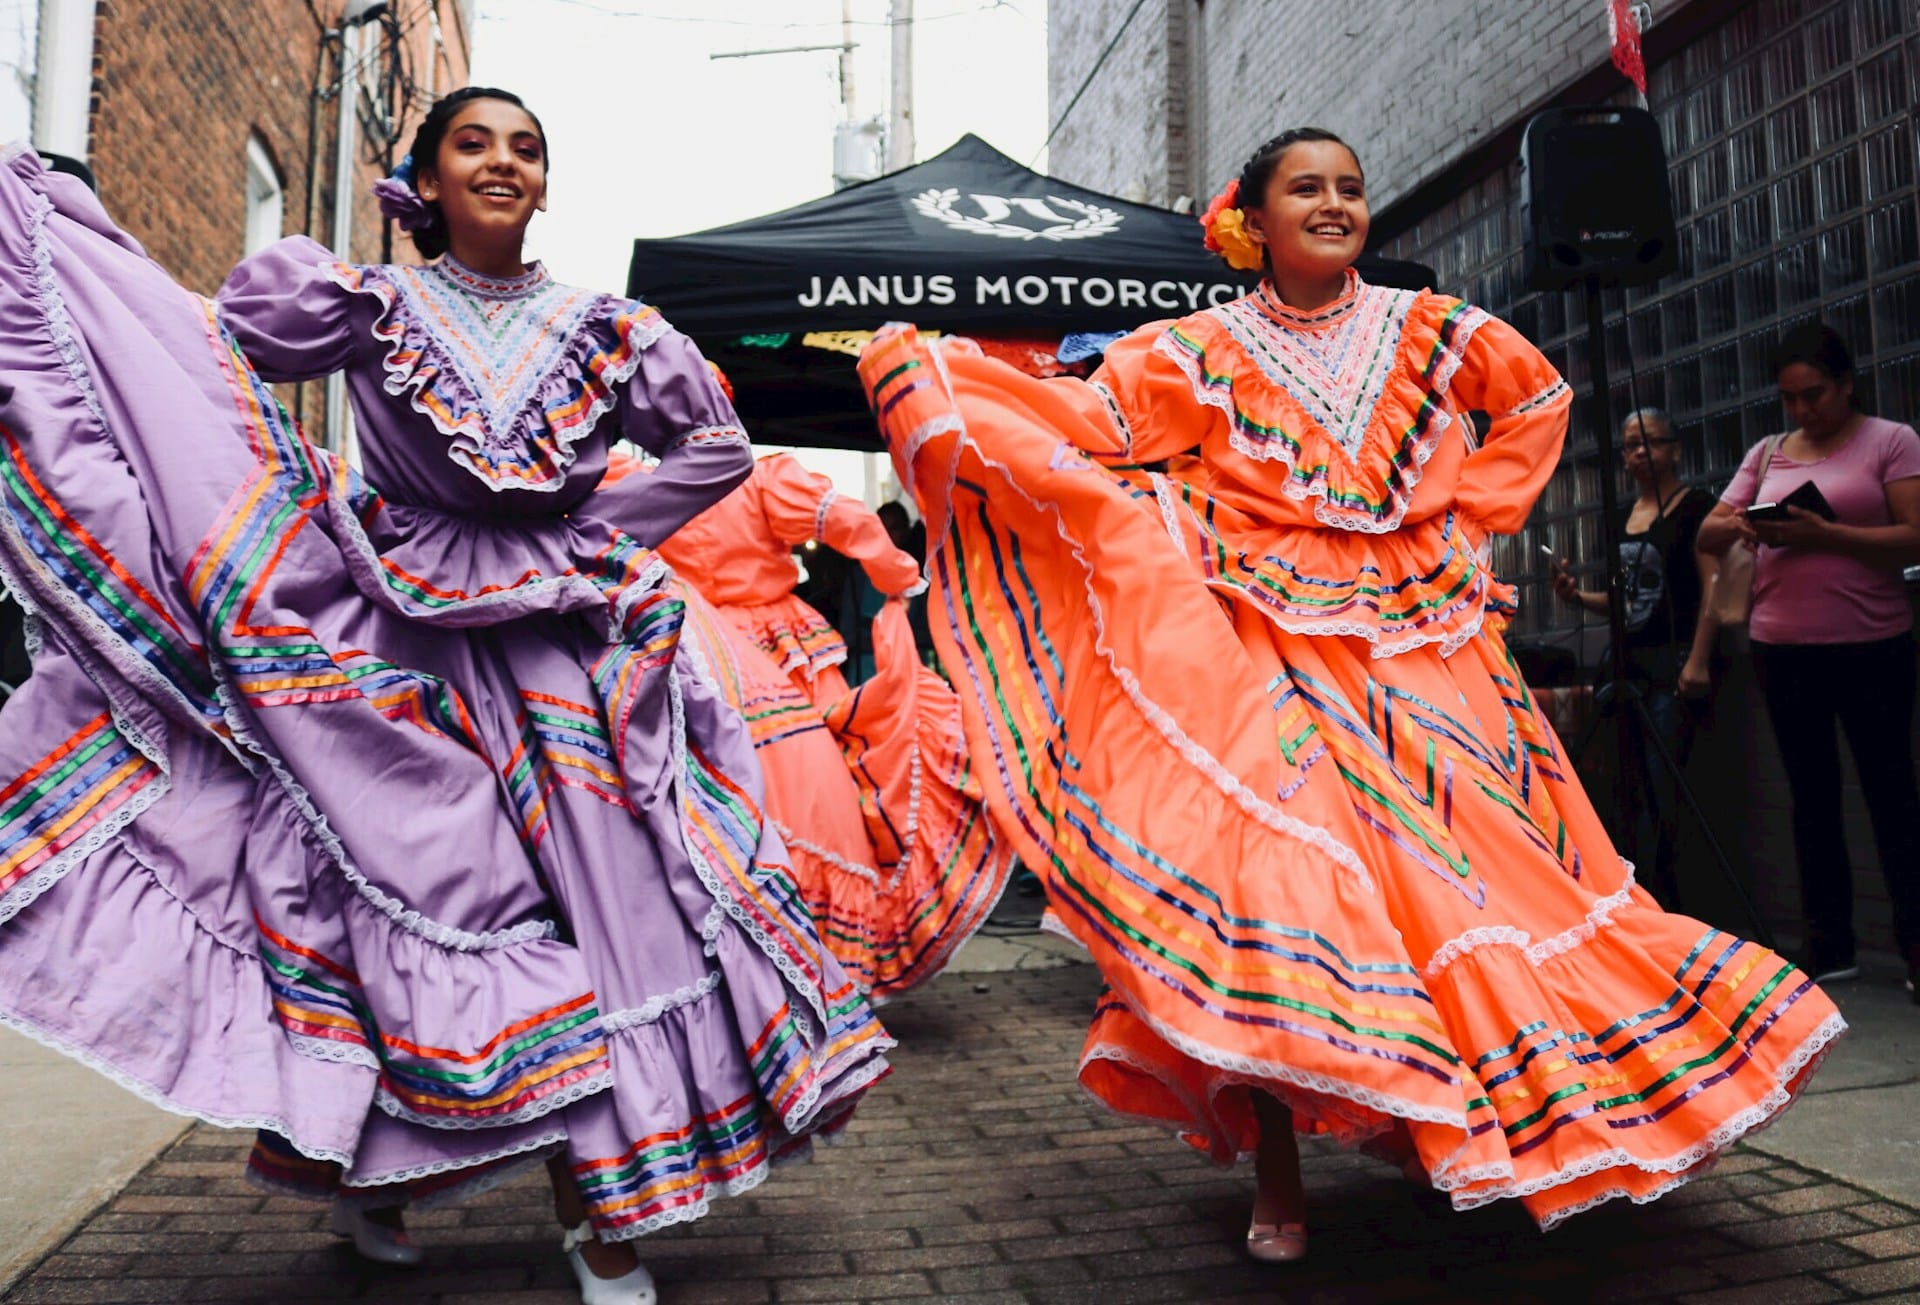 women-dancing-in-colorful-costumes-with-long-flowing-skirts-in-mexico